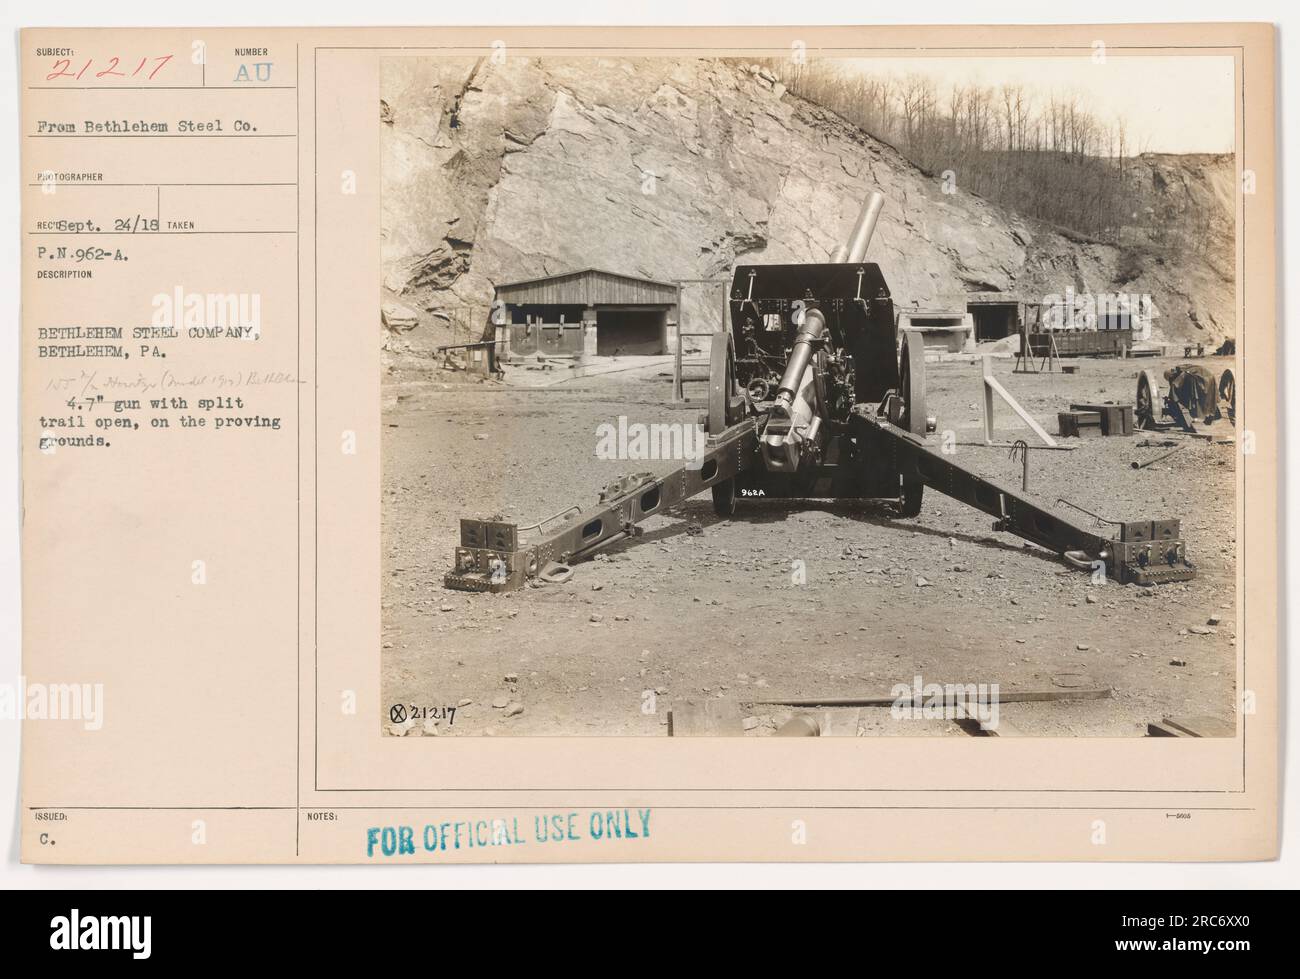 Image depicts a 4.7' gun with a split trail open, located on the proving grounds of Bethlehem Steel Company in Bethlehem, PA. The photo was taken on September 24, 1918, by a photographer from the company. This image is marked for official use only with the reference number 962A. Stock Photo